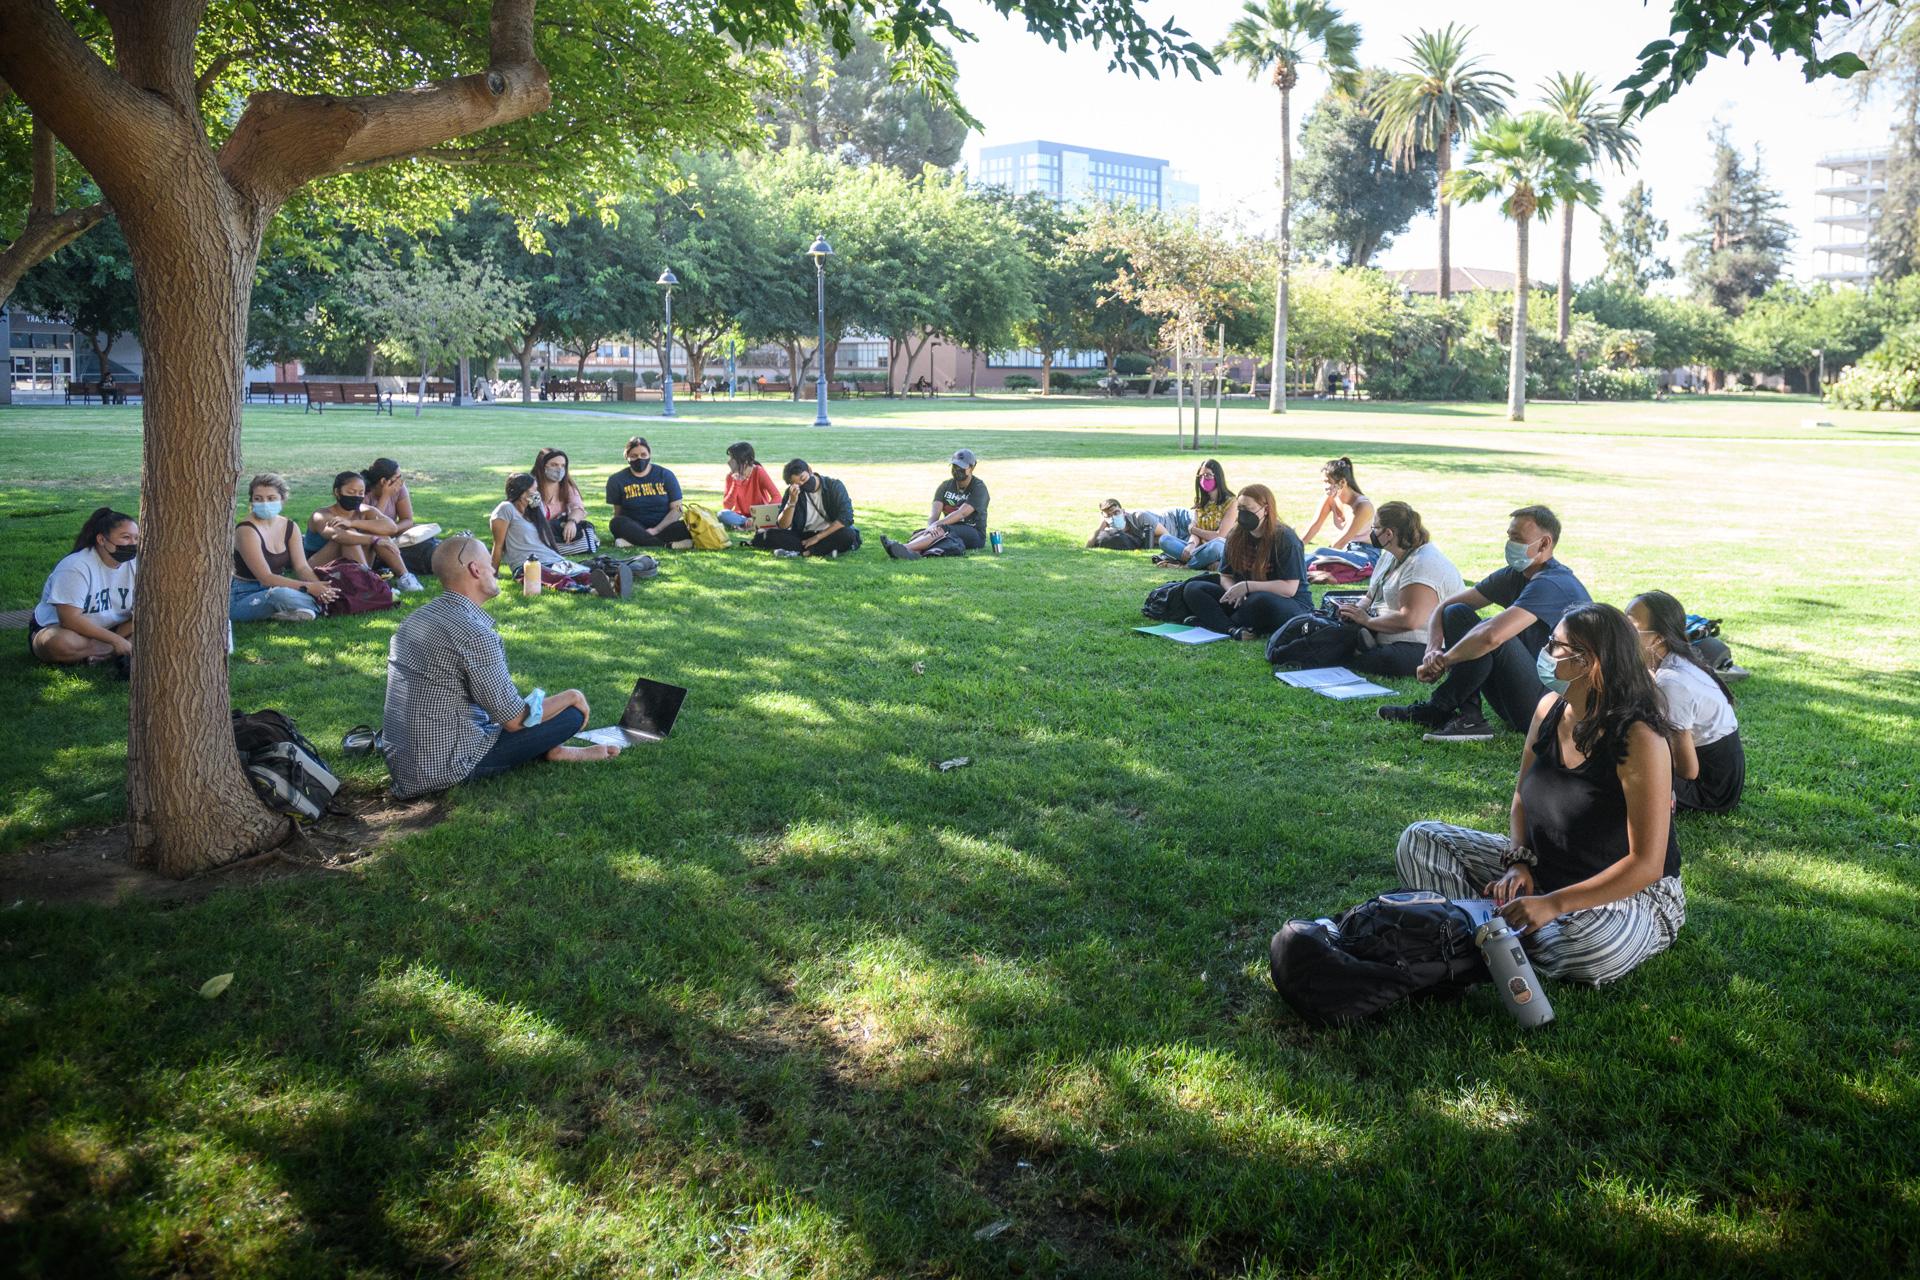 Students gathered together on the grass.